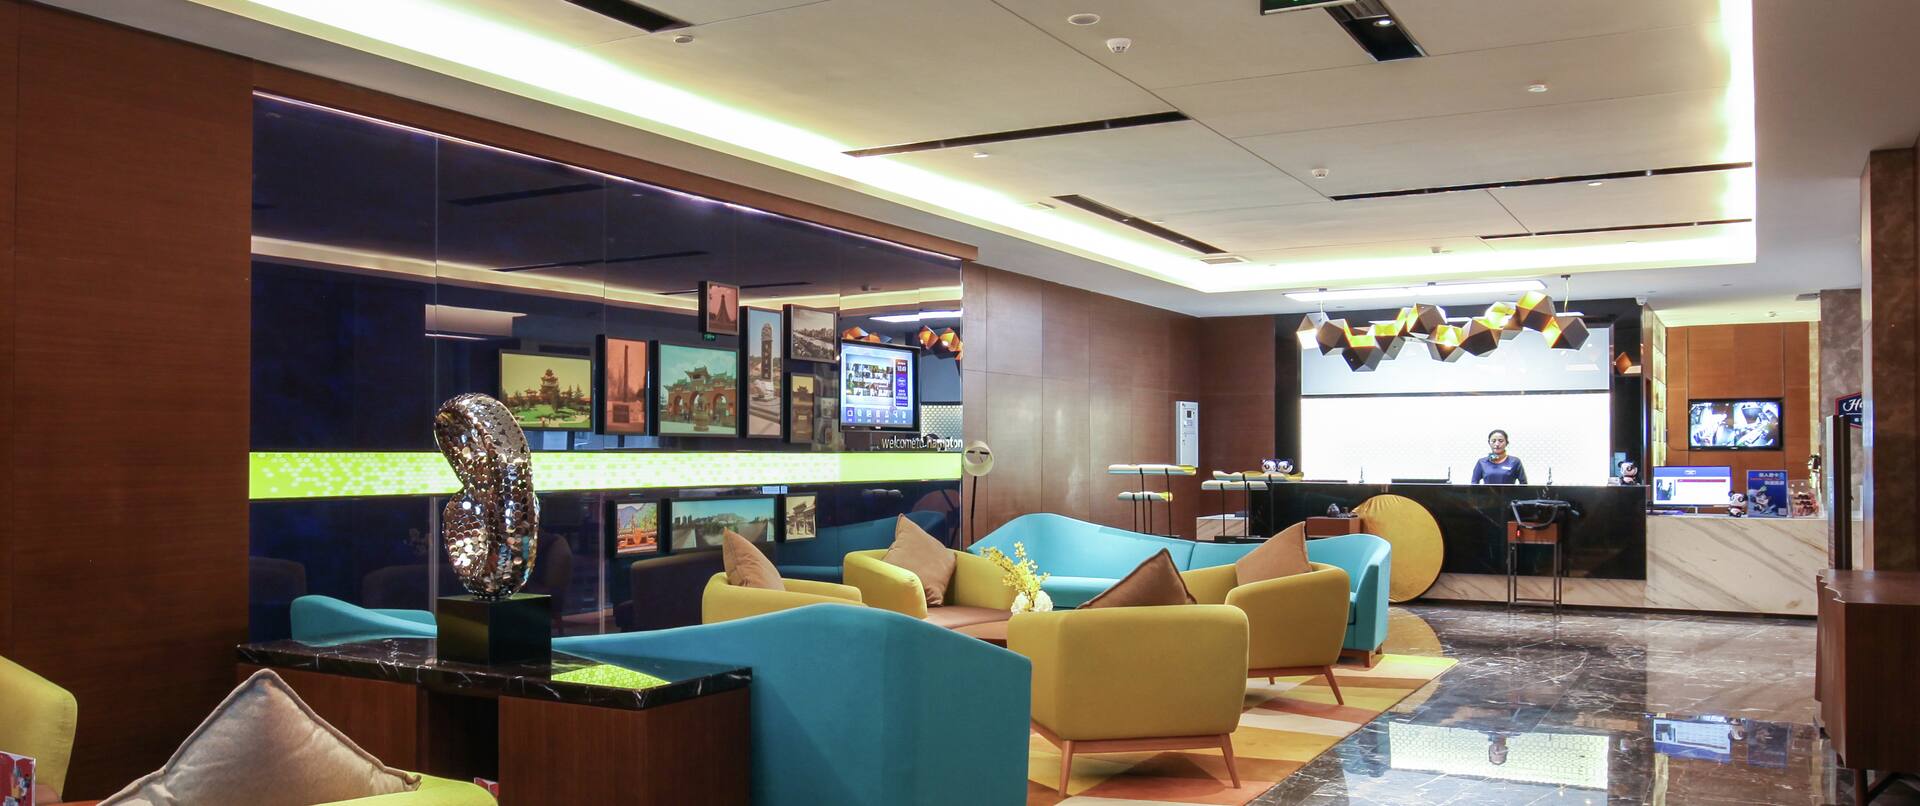 View of Lounge Seating in Lobby and Hampton Staff Member Standing Behind Front Desk